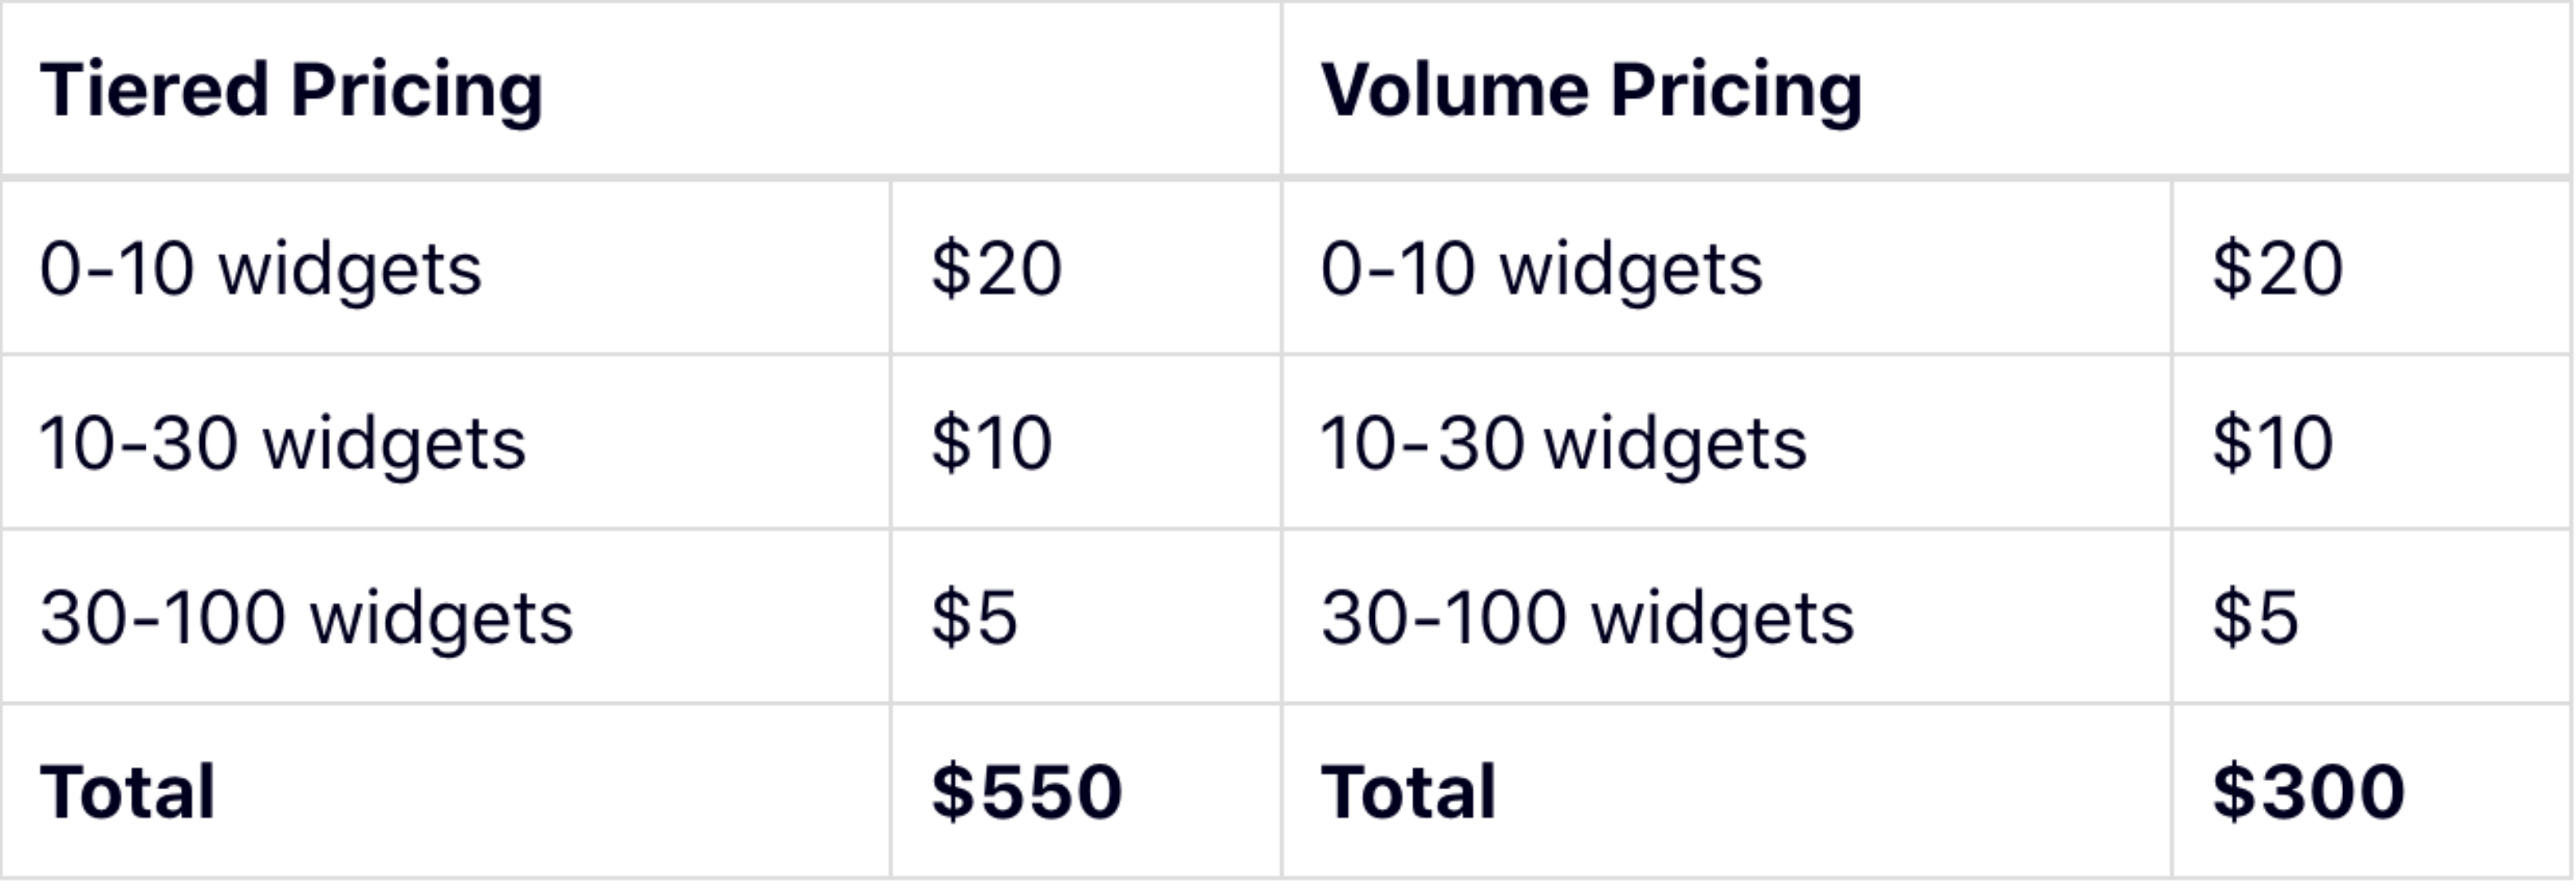 Tiered Pricing Model vs Tier Pricing Strategy | Definition & Examples